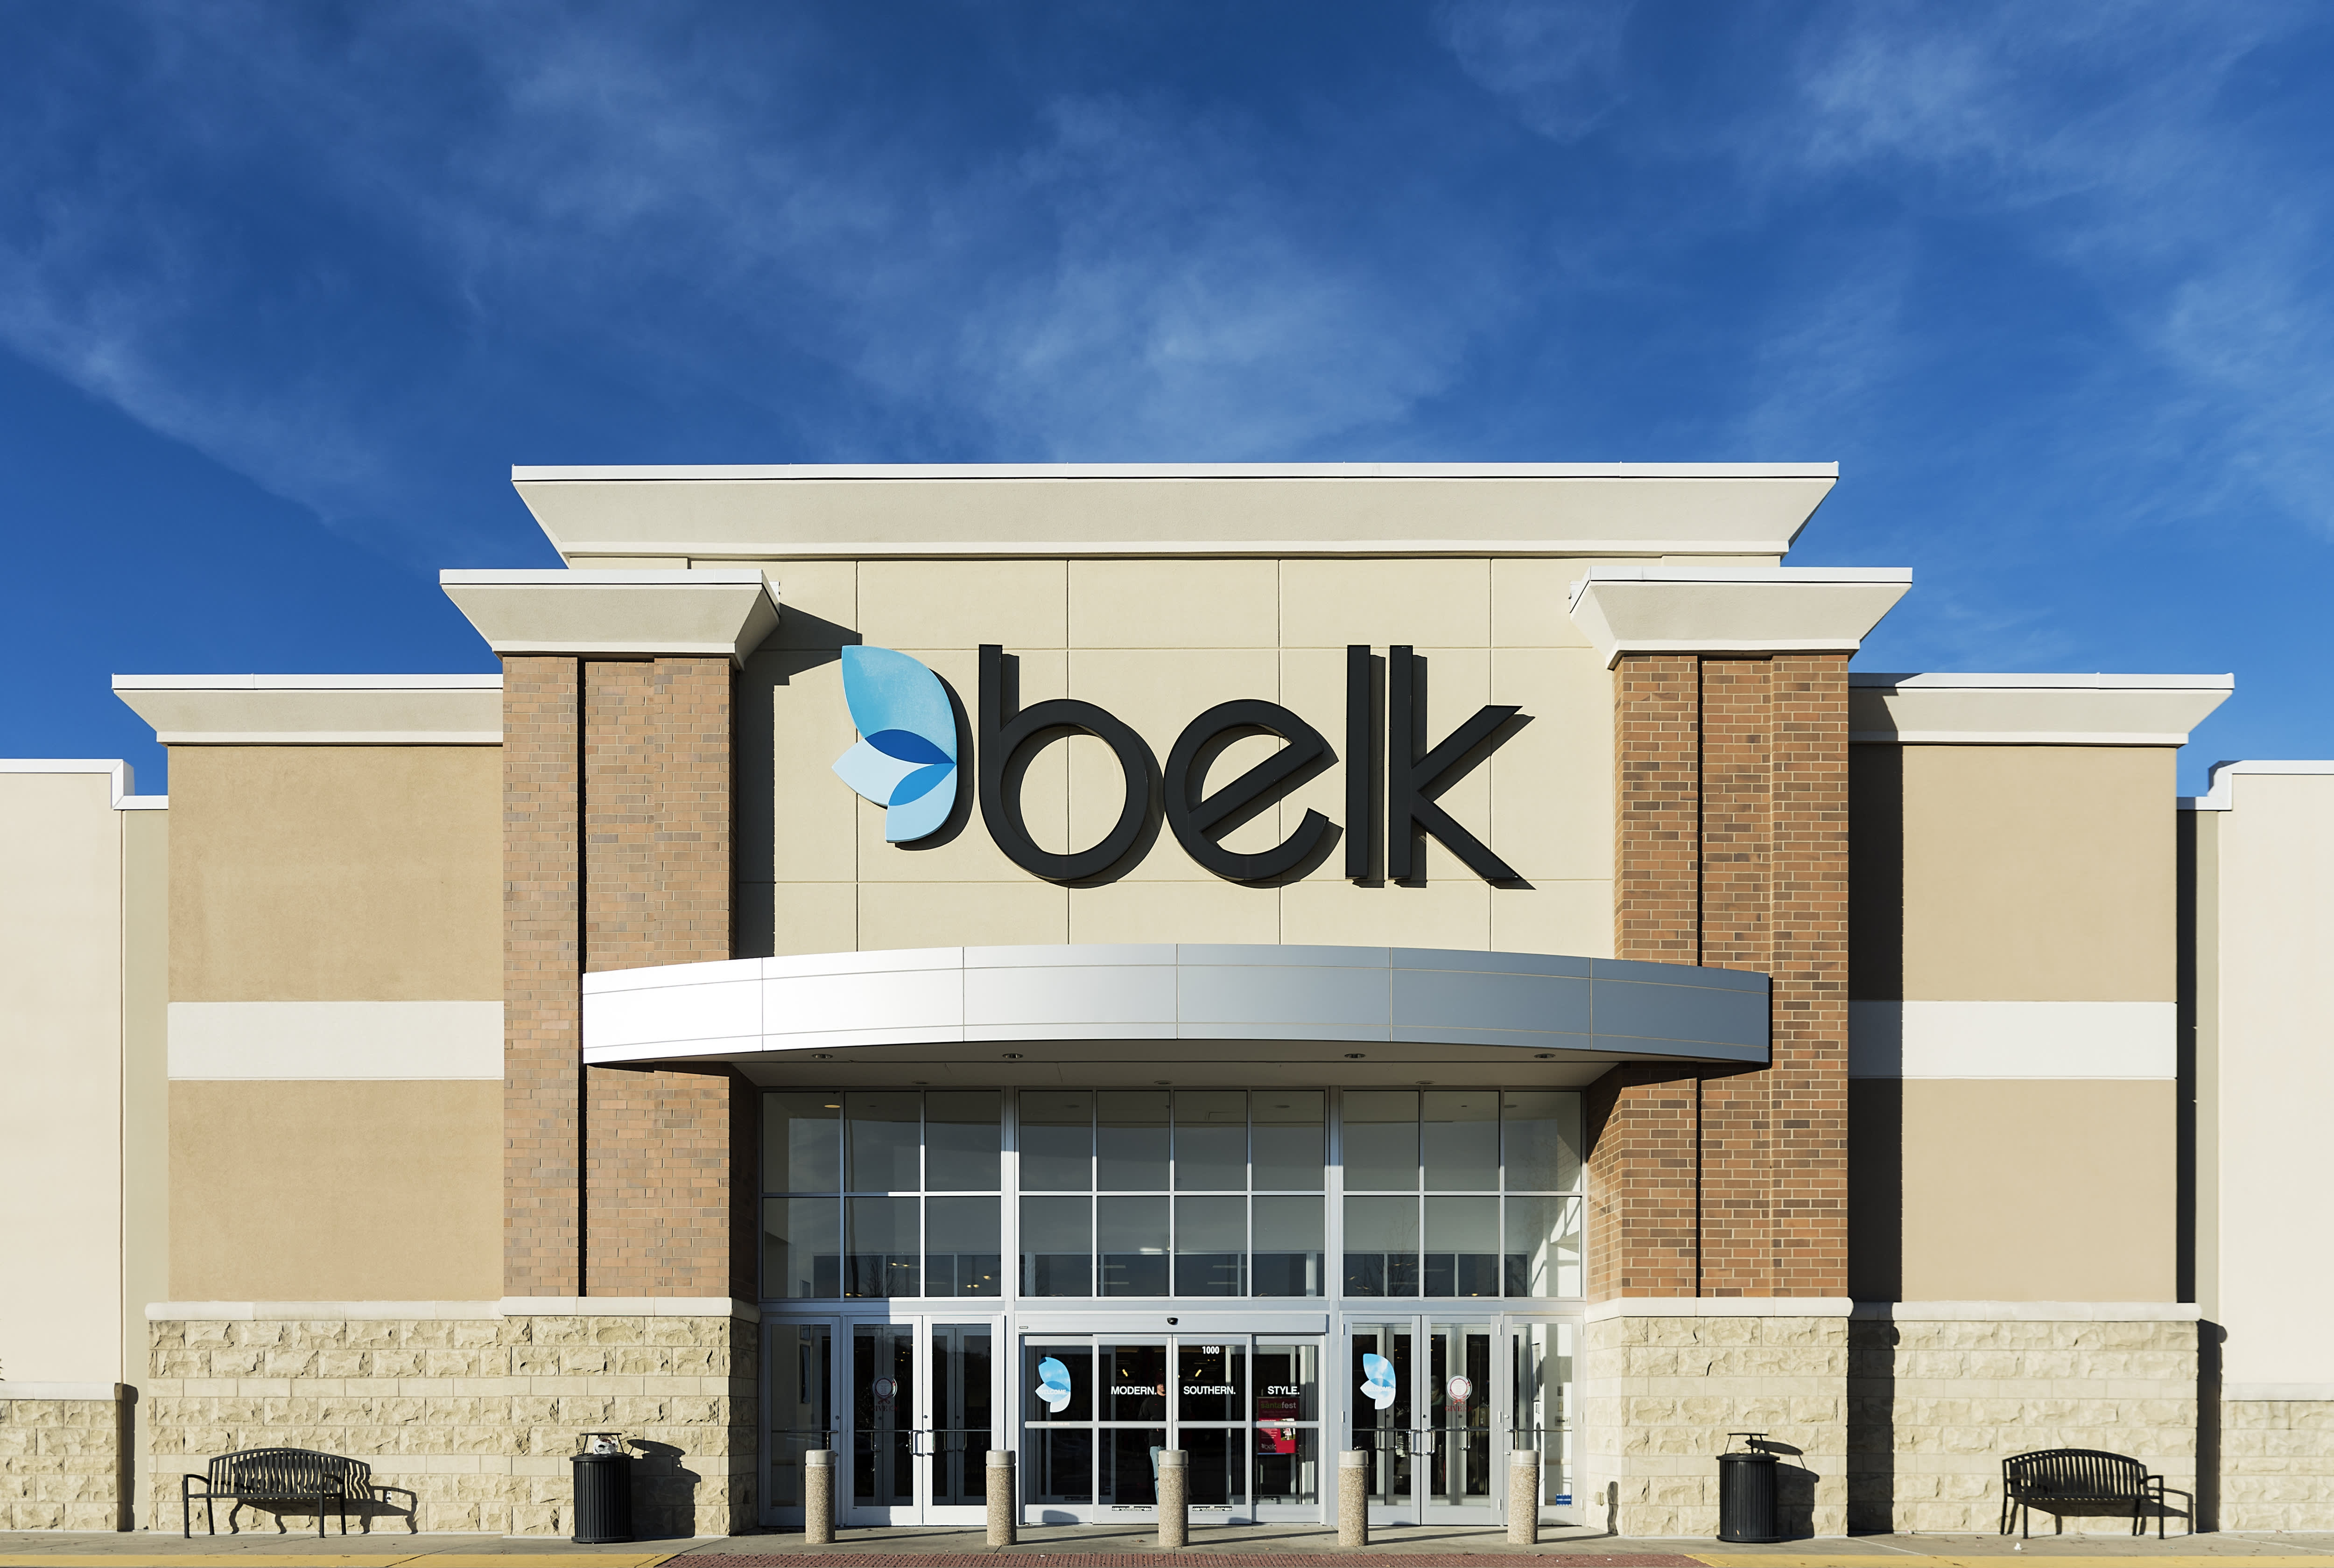 Department store retailer Belk plans to file for Chapter 11 bankruptcy